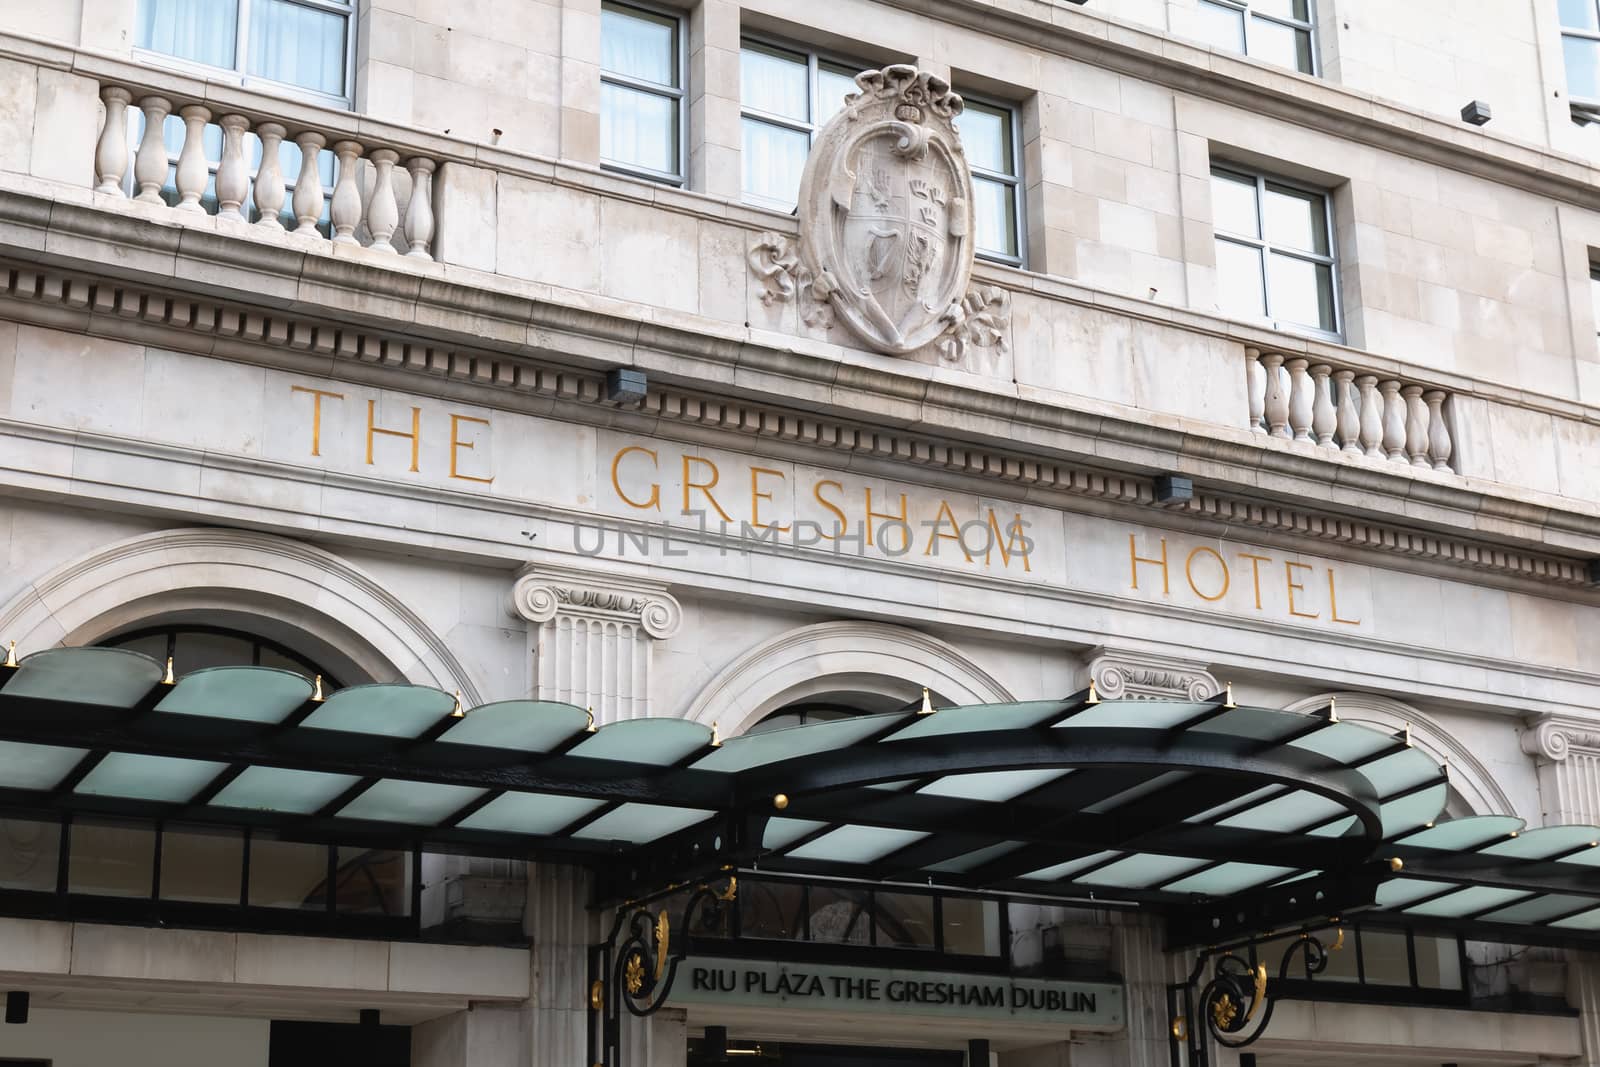 view of the front of the luxurious hotel The Gresham Hotel in Du by AtlanticEUROSTOXX